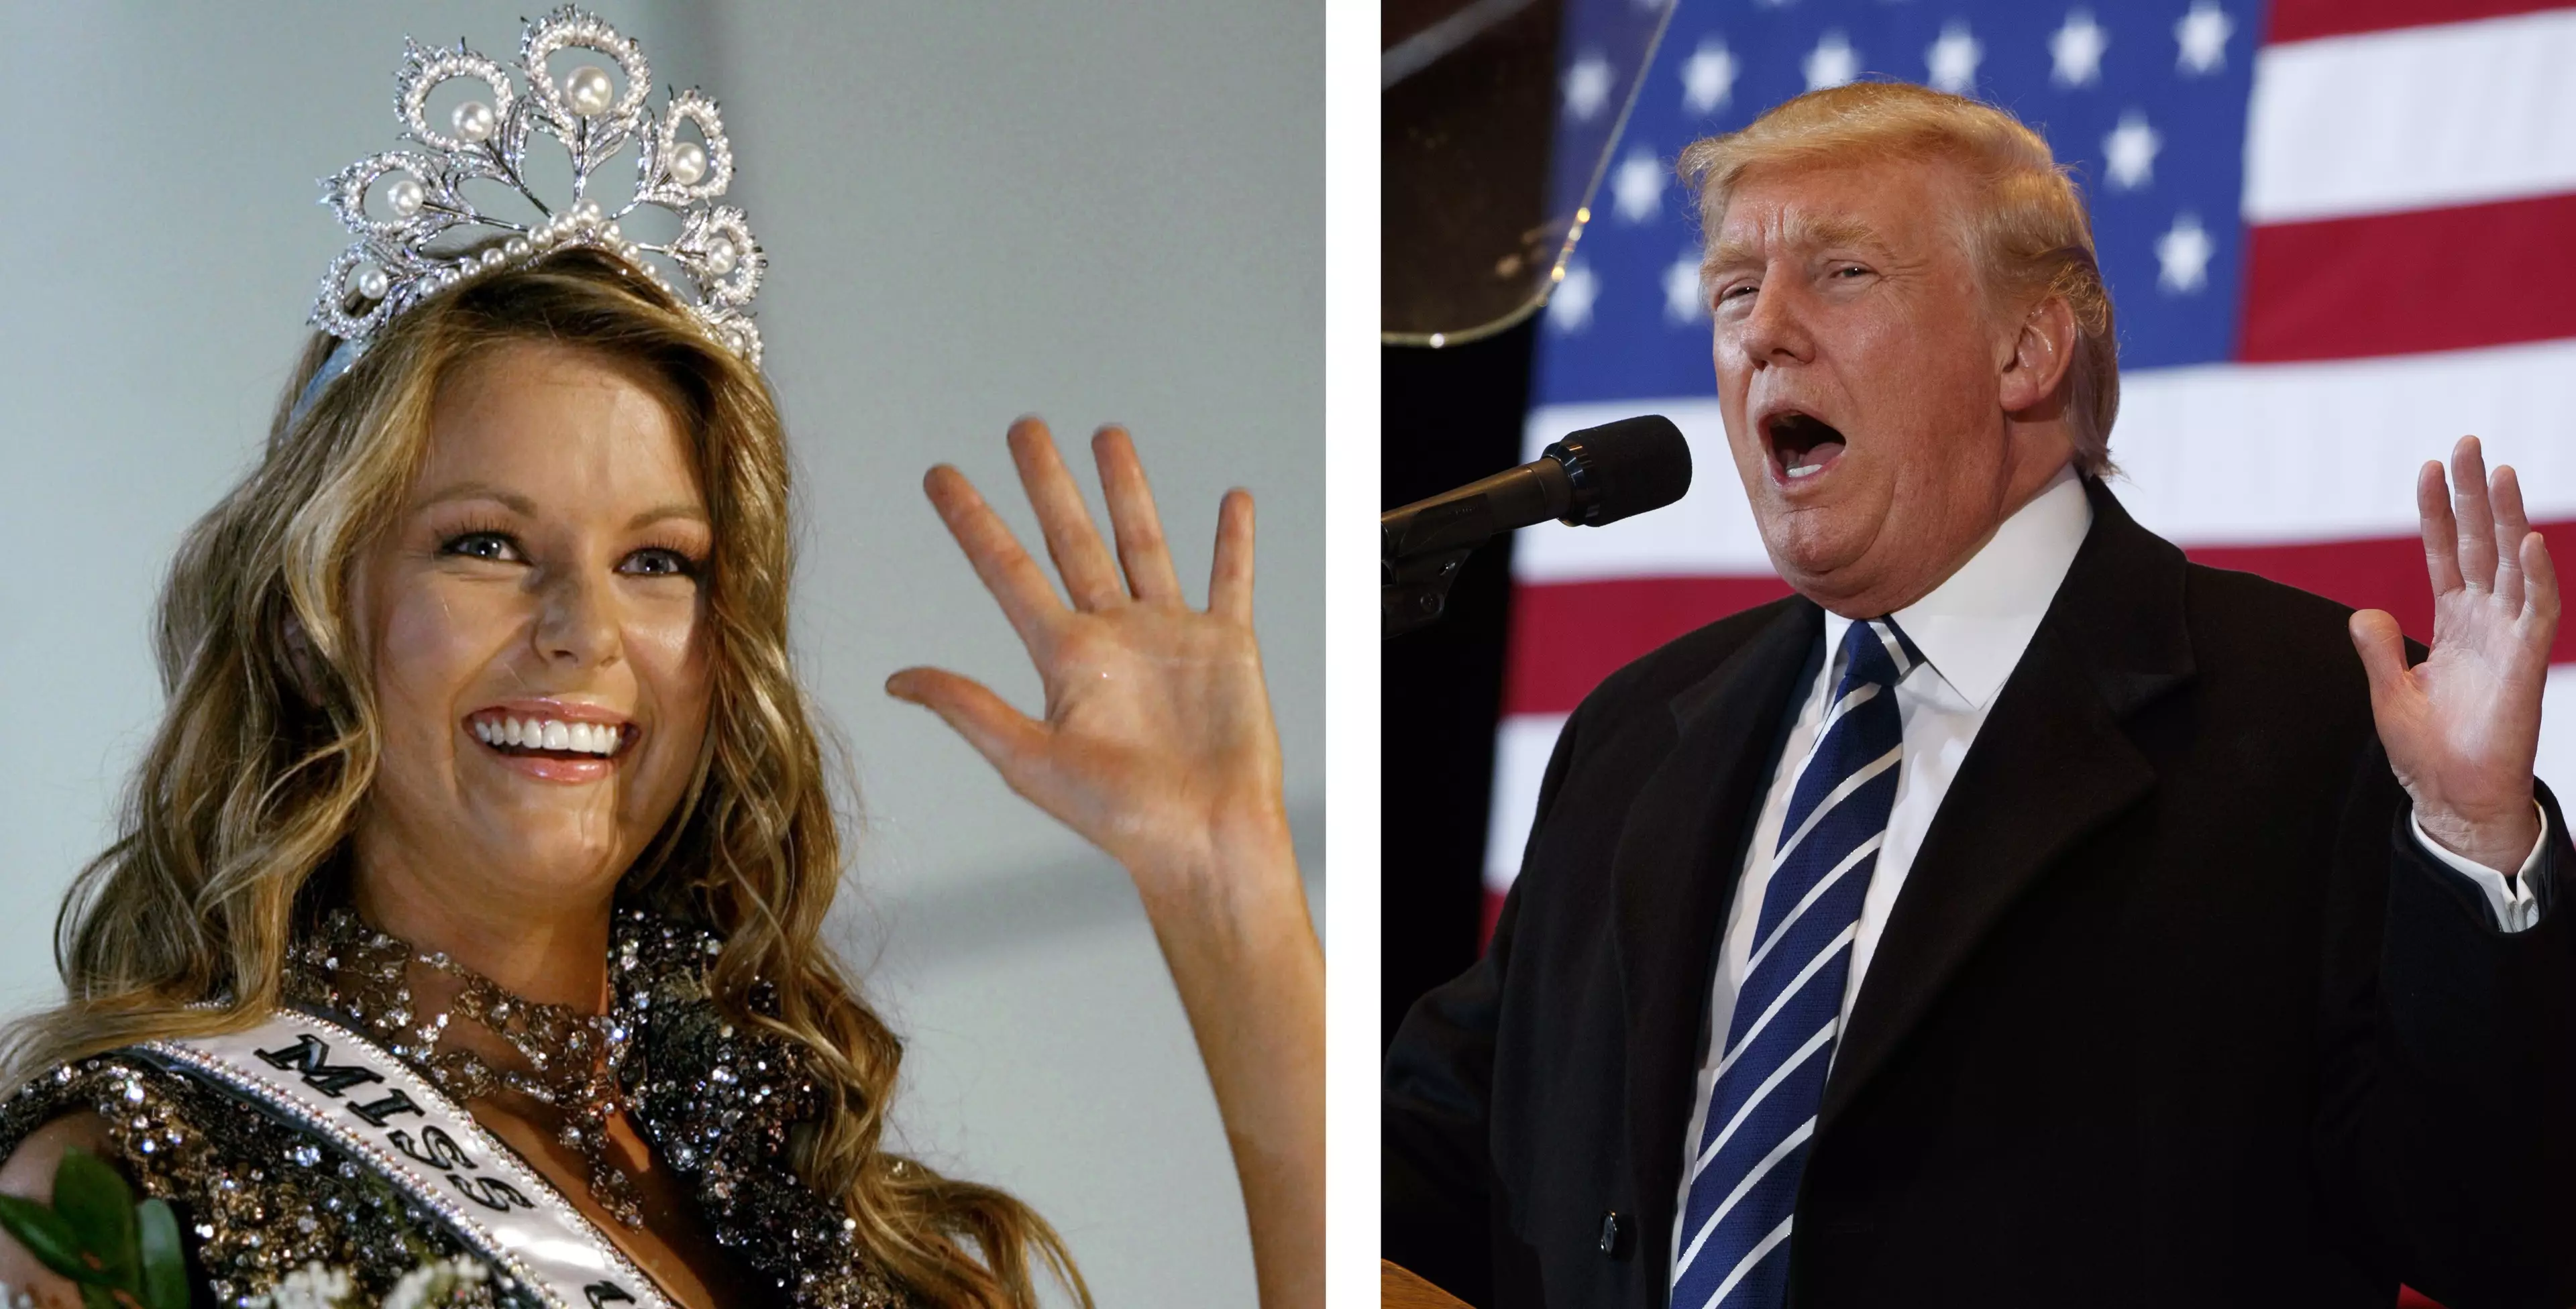 New Footage Shows Donald Trump Grabbing And Kissing Former Miss Universe